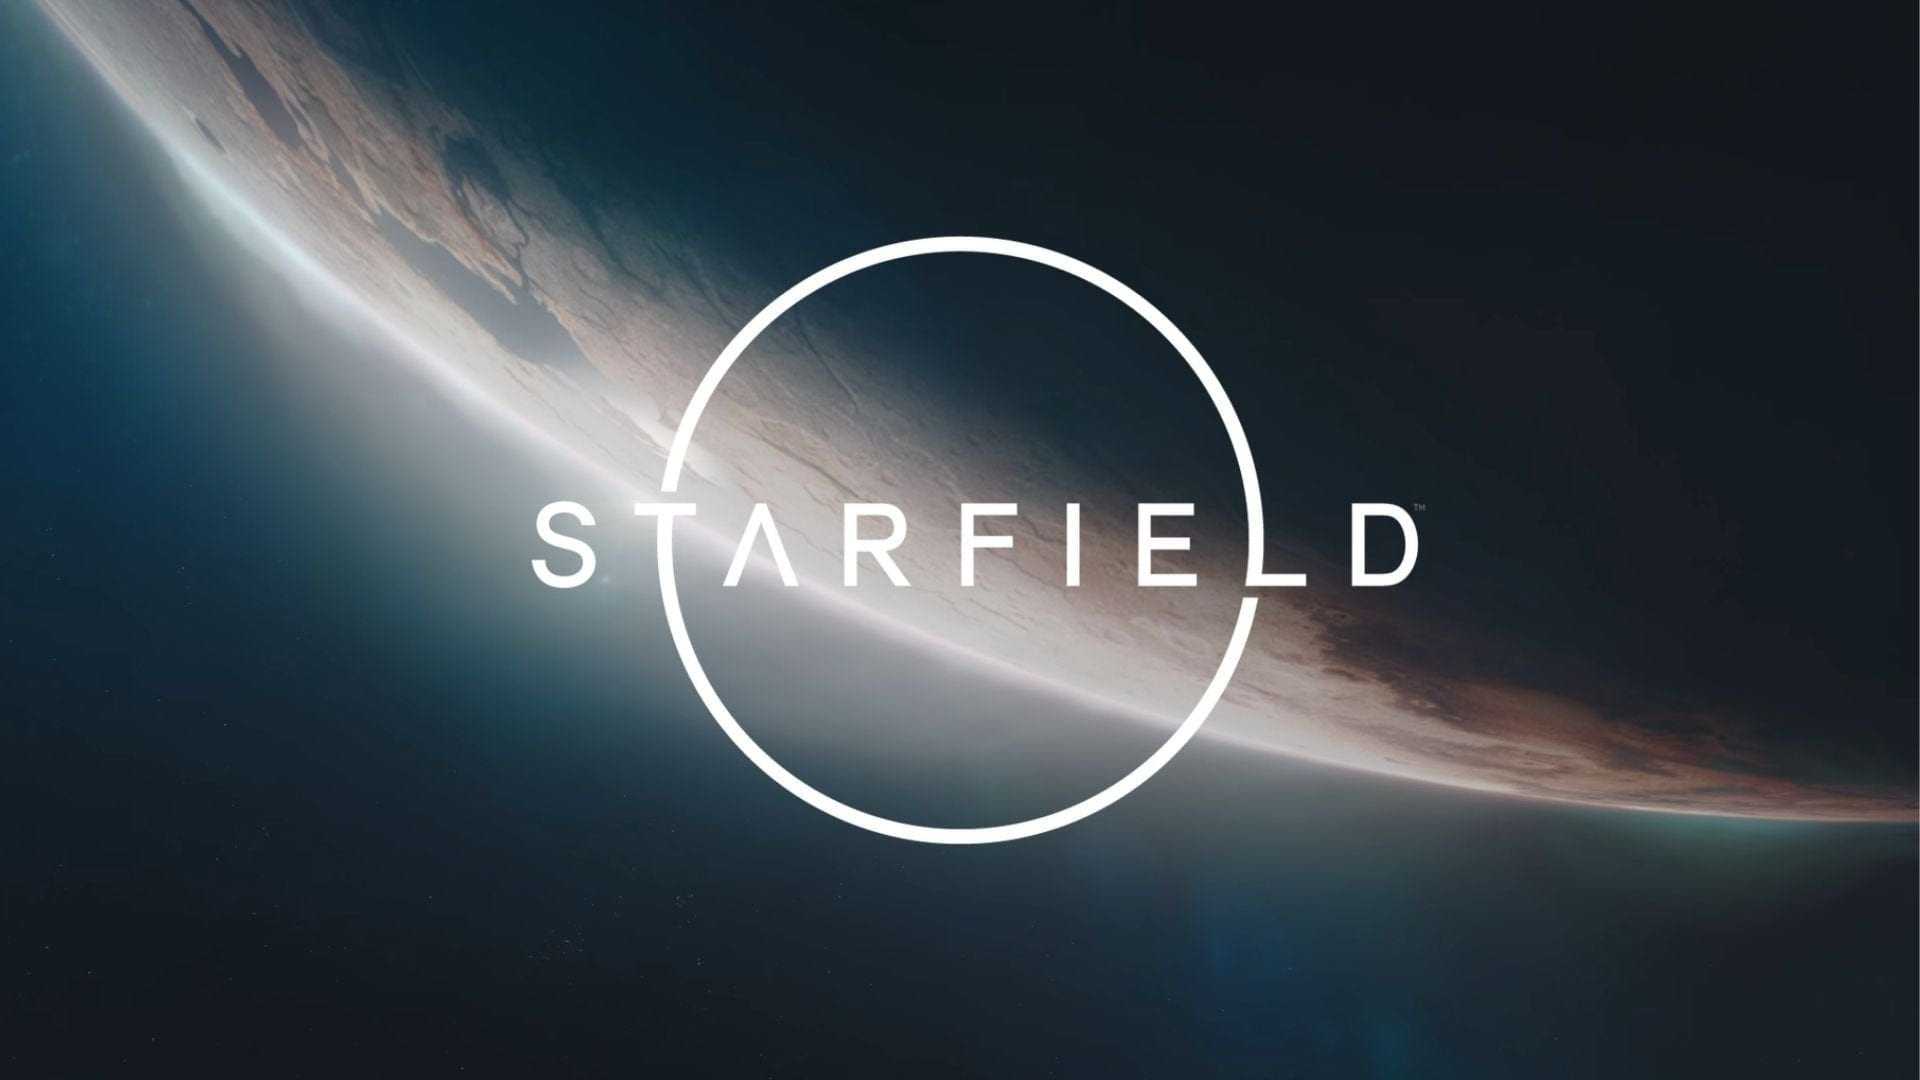 Starfield: Official Gameplay Reveal 